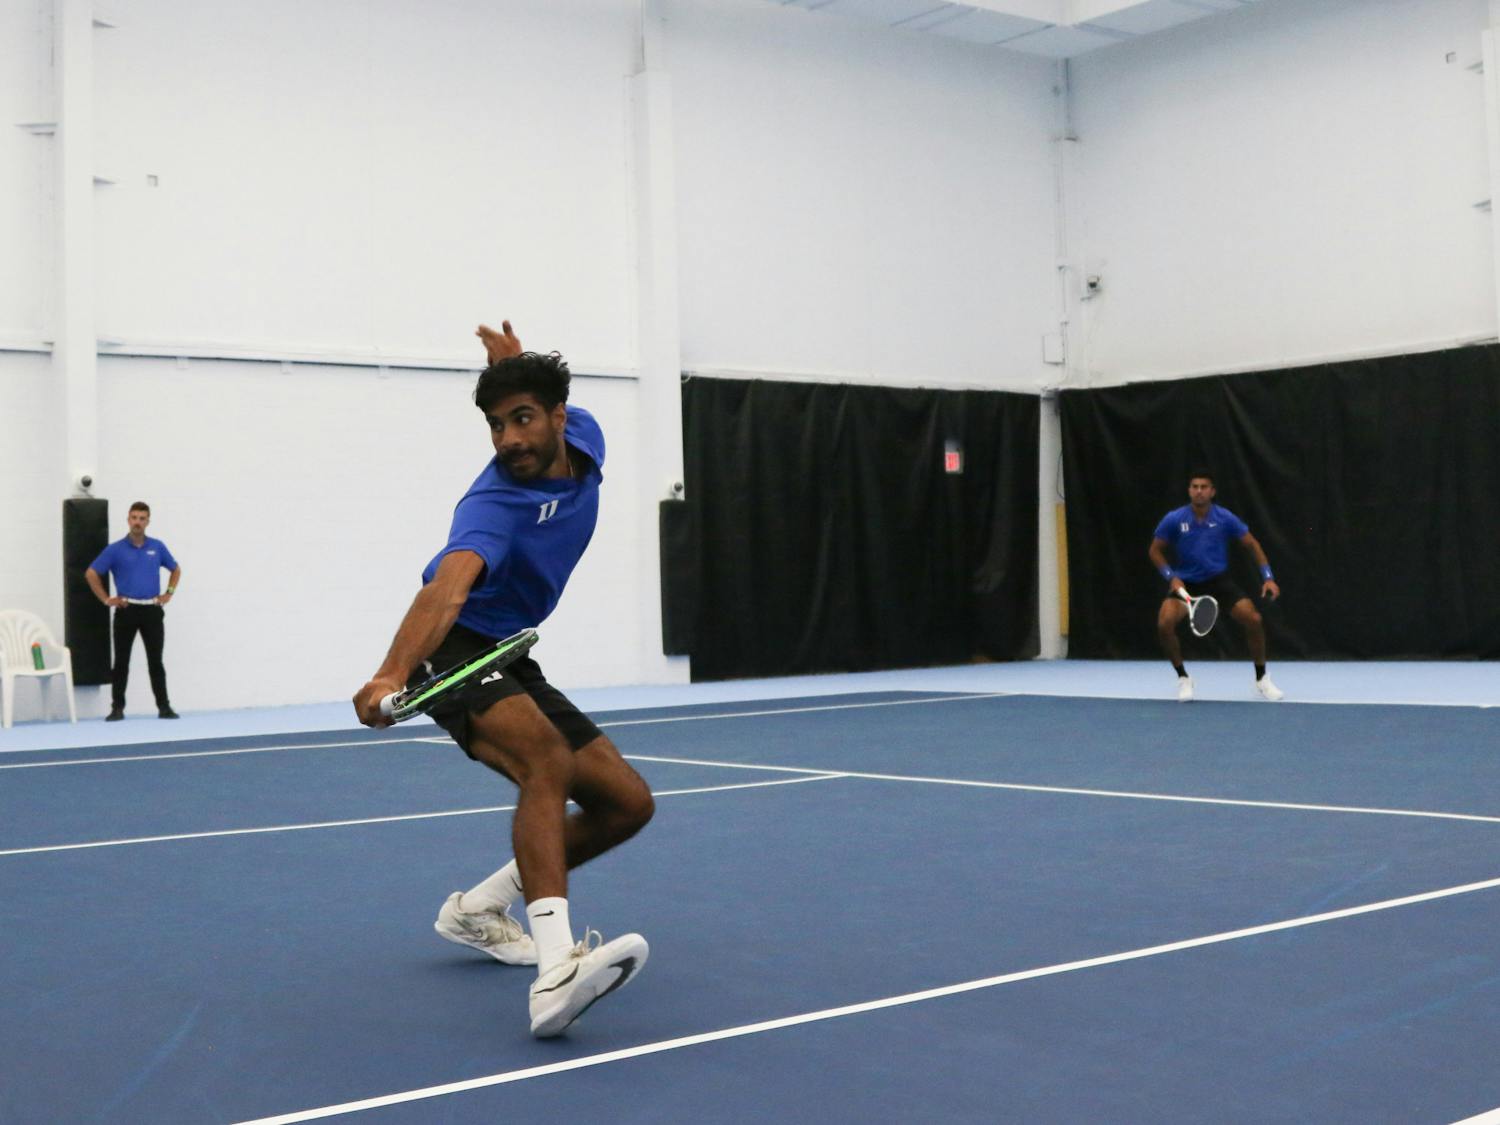 Niroop Vallabhaneni and Faris Khan have stepped up well as Duke's No. 3 doubles team. 